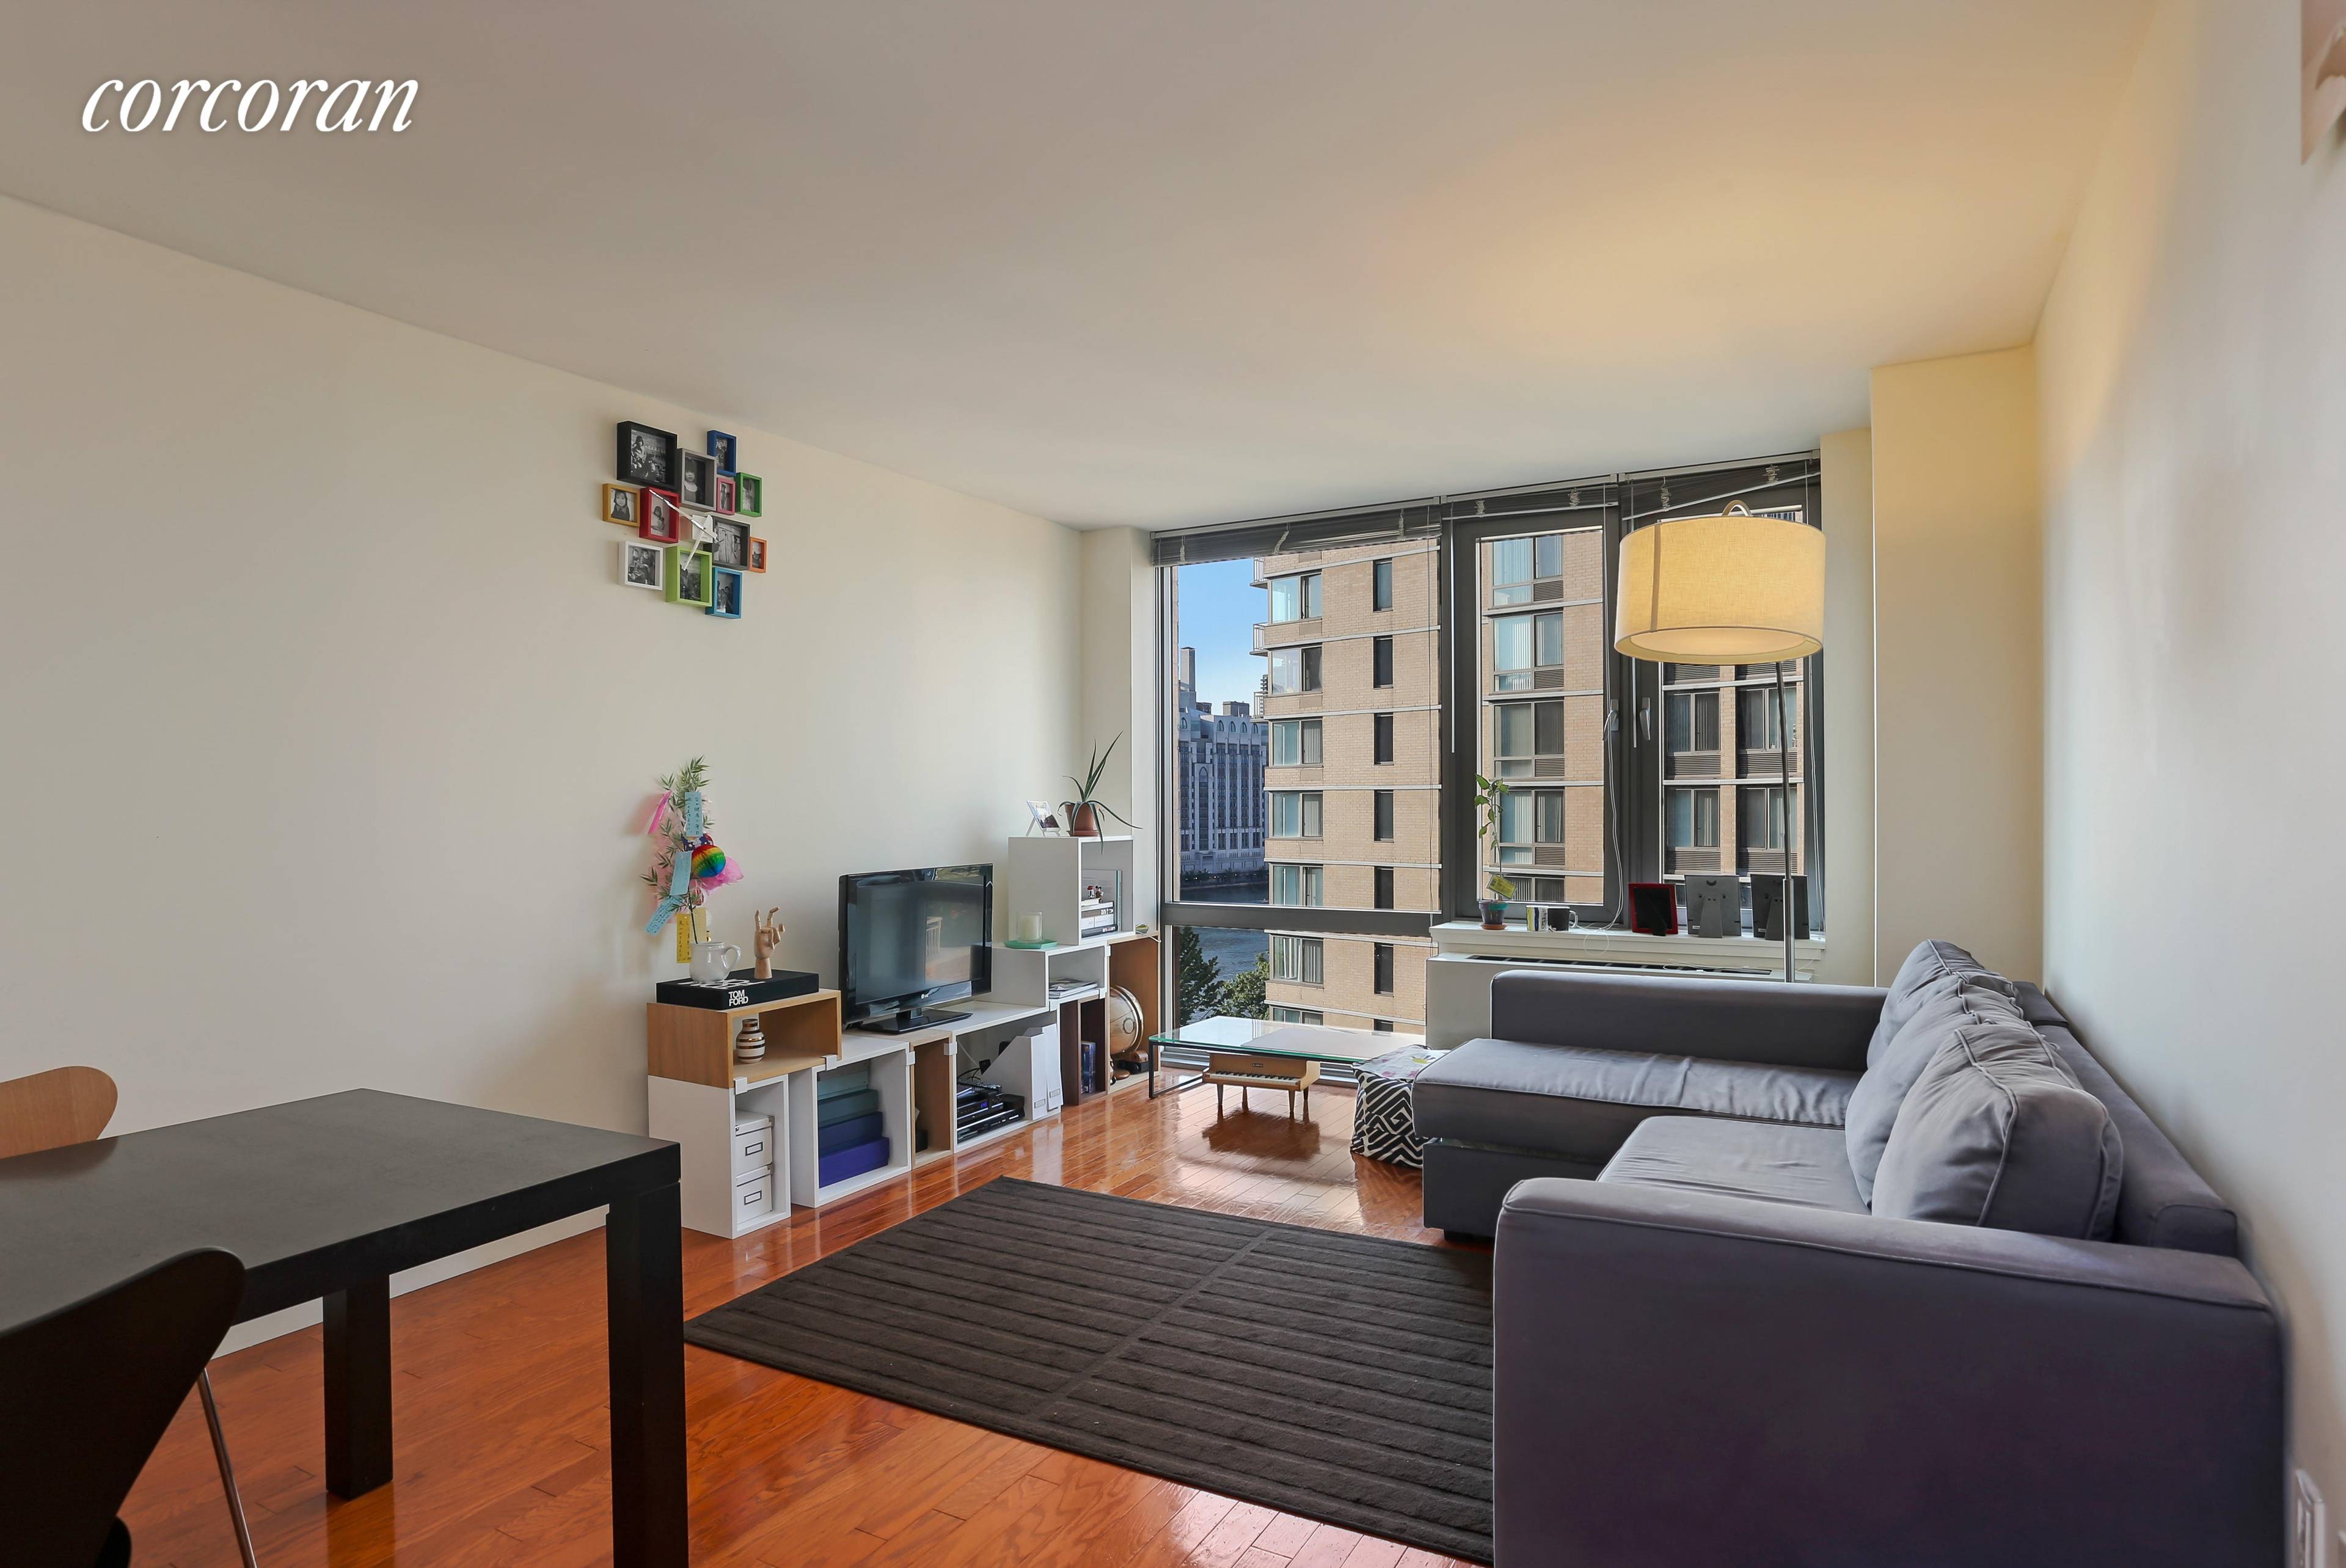 Brand New Huge 1000 sqft 2 Bedroom 2 Bathroom Apartment with a Huge Storage Bin Available at a Monthly Cost in One of the Most Desirable Condo Buildings on Roosevelt ...